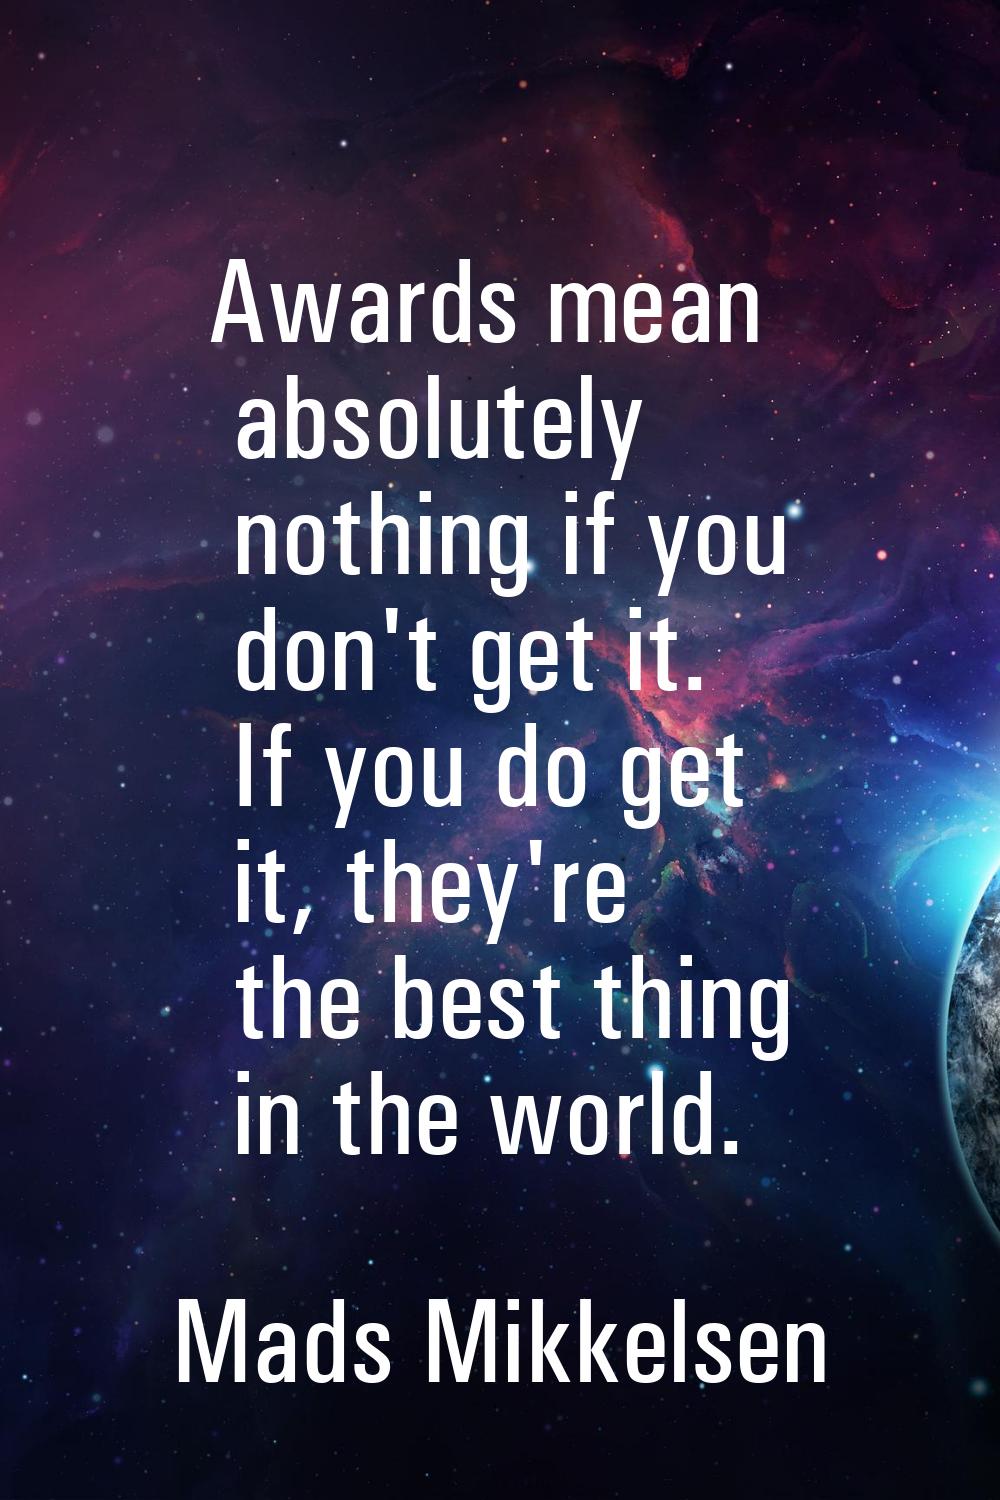 Awards mean absolutely nothing if you don't get it. If you do get it, they're the best thing in the